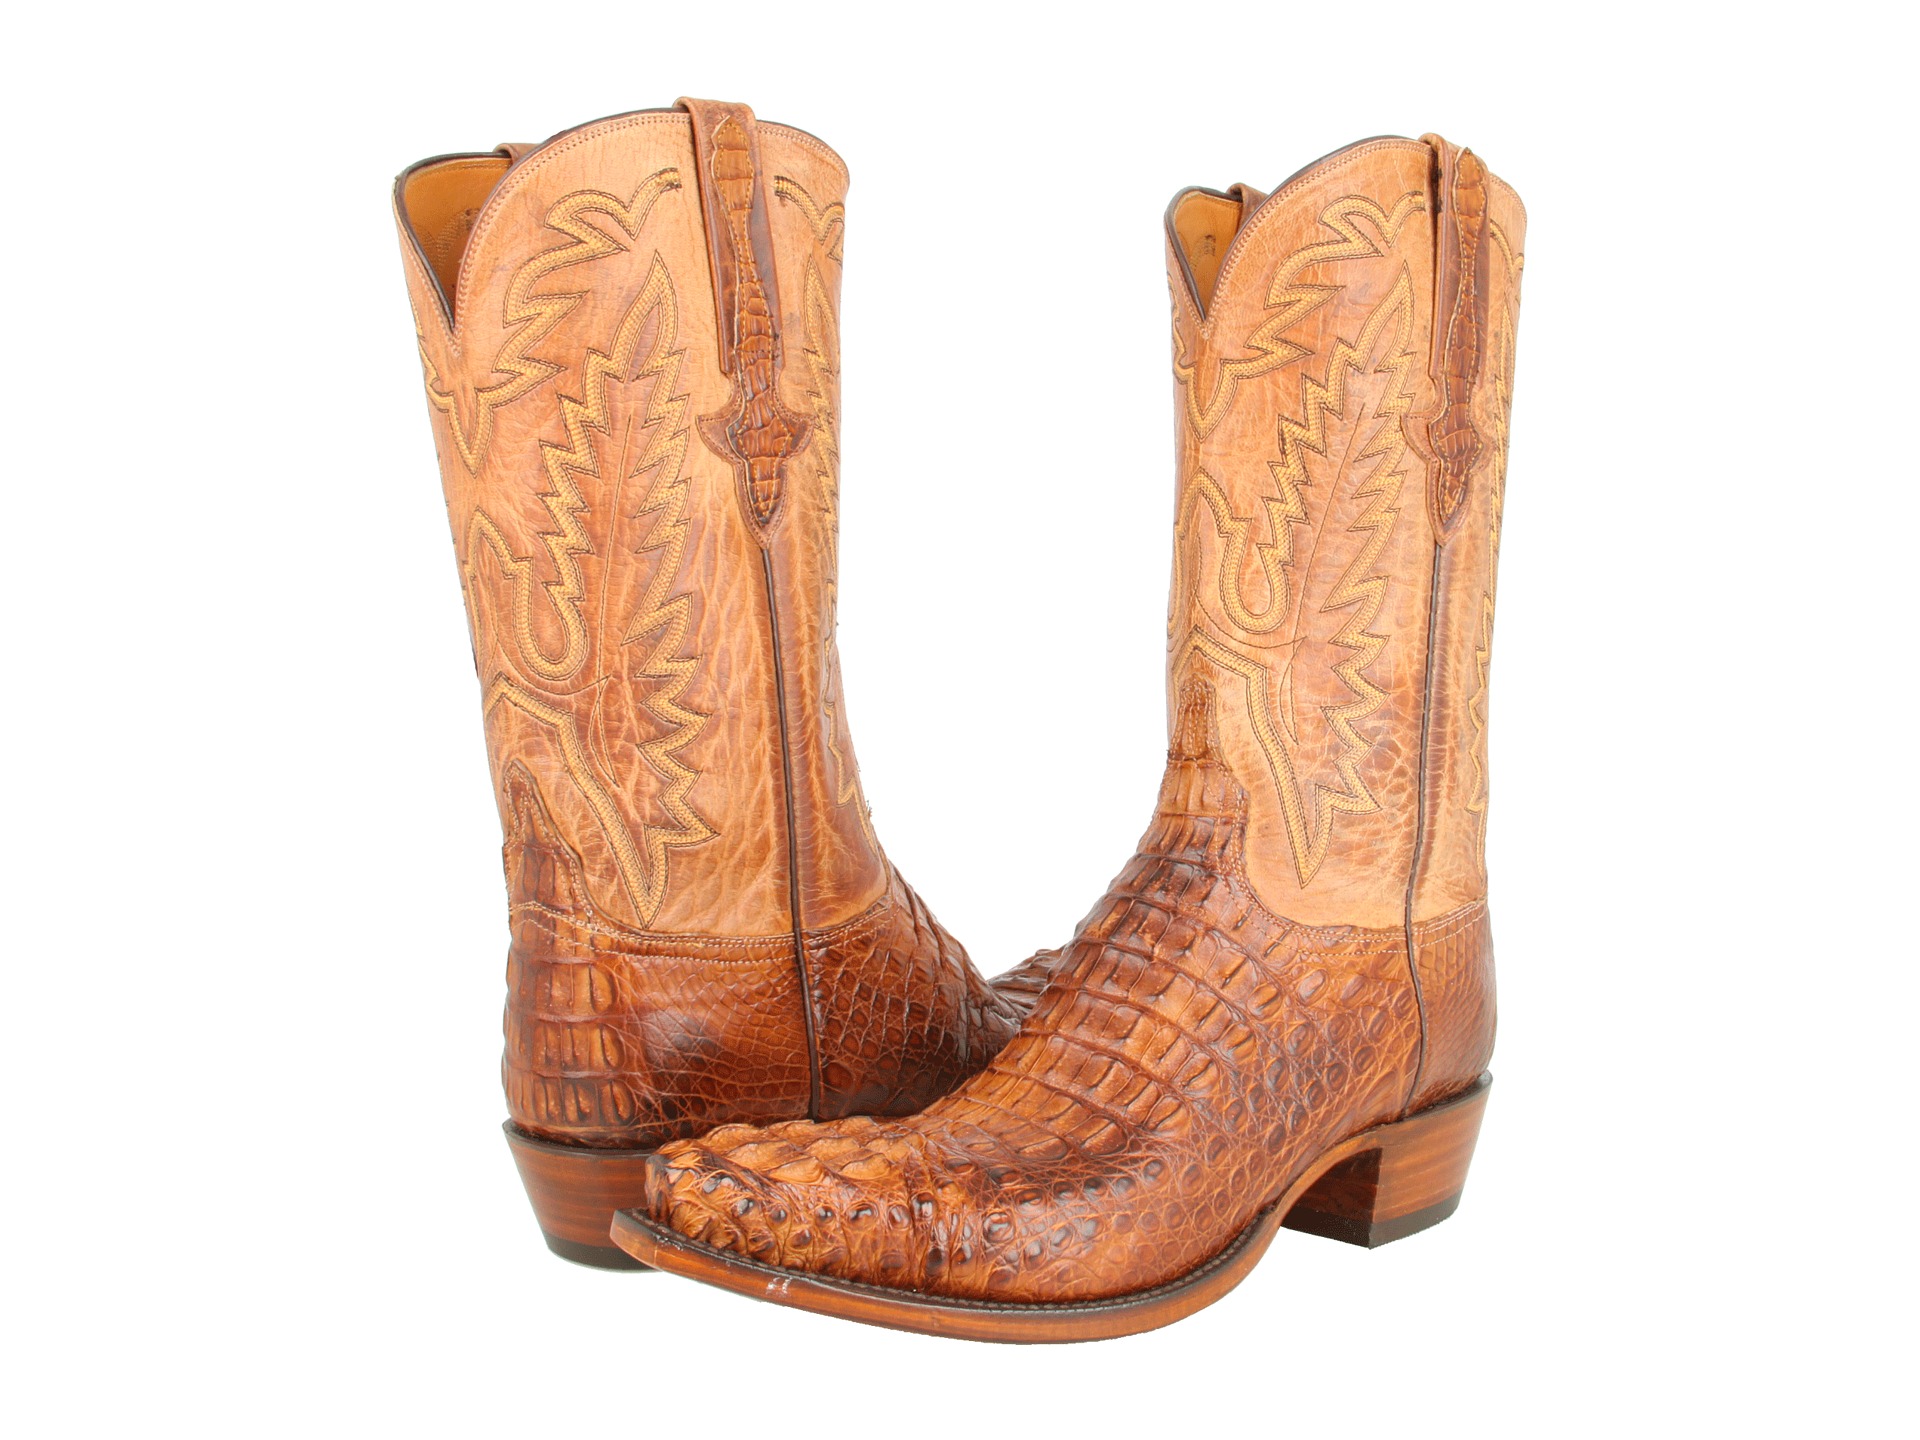   M1005 $350.00  Lucchese L1331 $839.99 $1,400.00 SALE